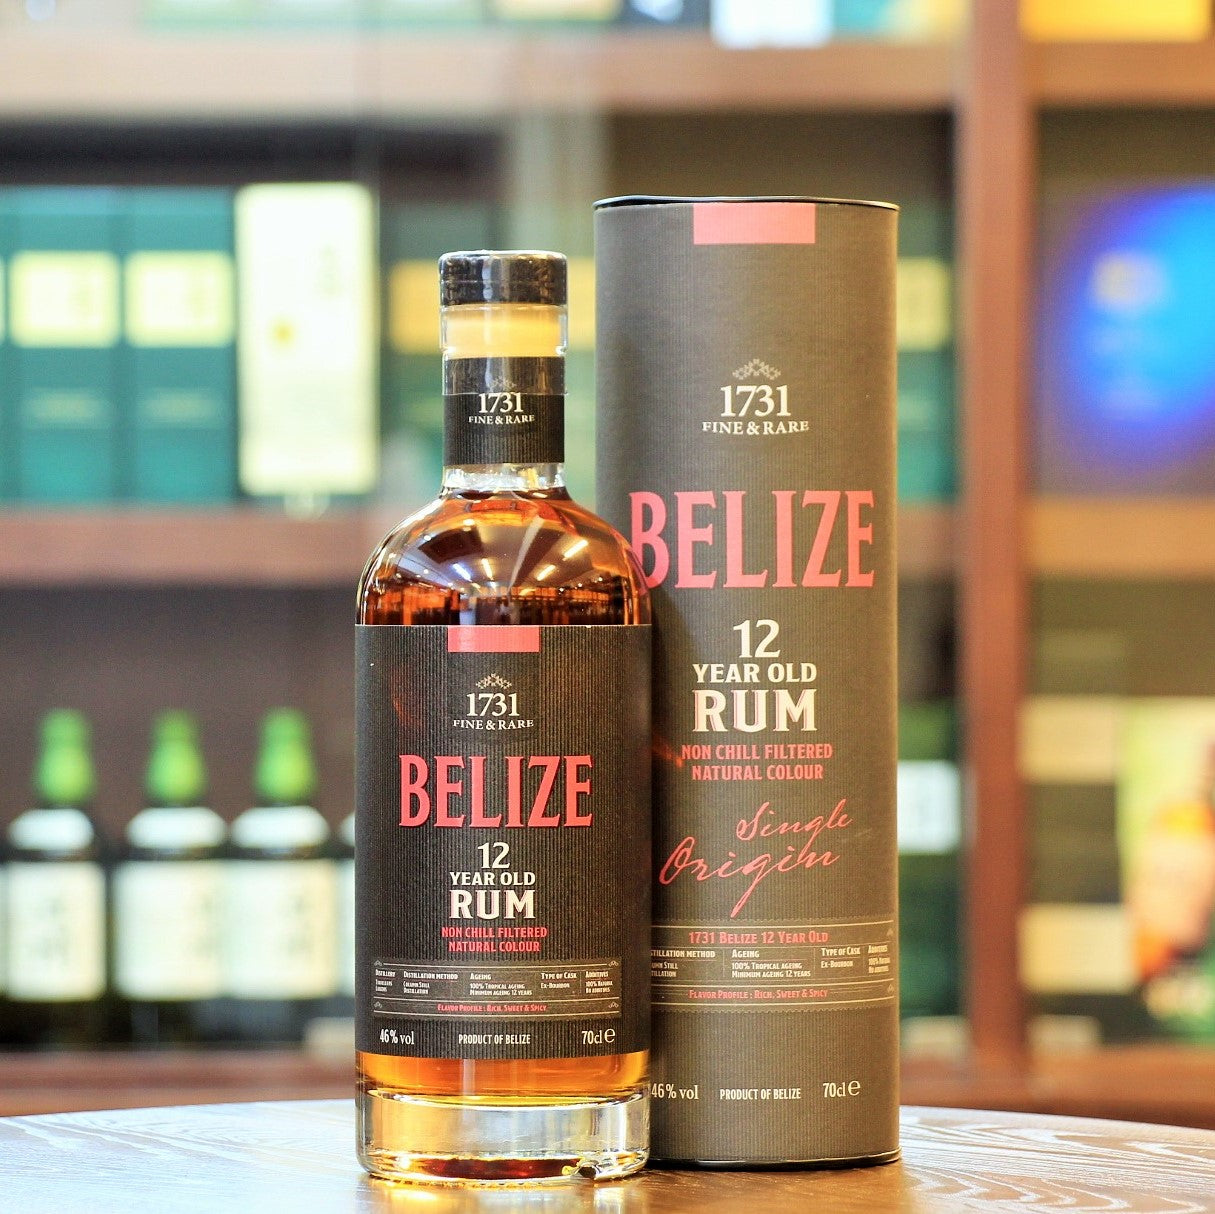 Natural Color. Natural Flavours. 100% Tropically Aged for a minimum of 12 years in ex-bourbon oak barrels, this rum from Belize was distilled in column stills at Travellers Liquors (located in the Central American country of Belize) and offers a rich, sweet and spicy flavour profile.